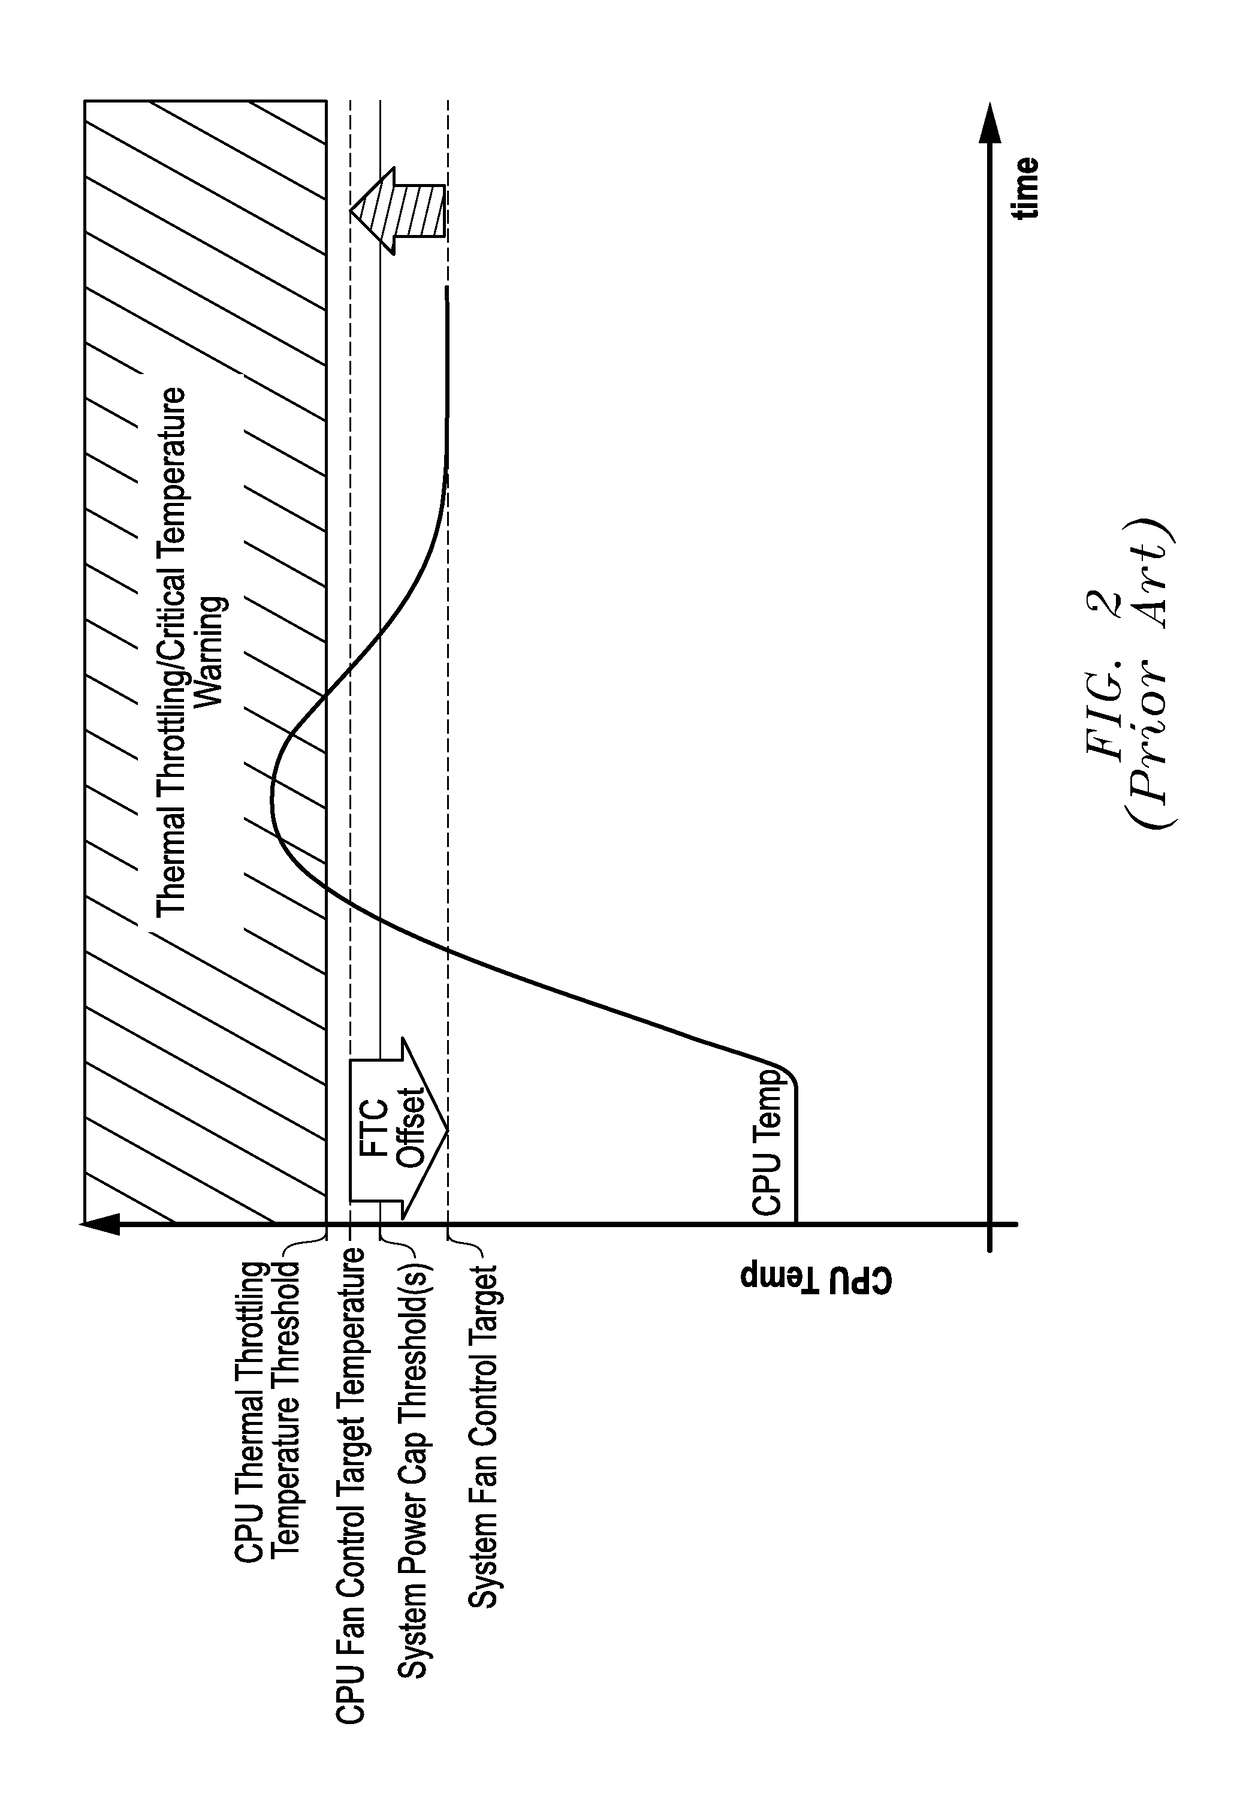 Systems and methods of adaptive thermal control for information handling systems